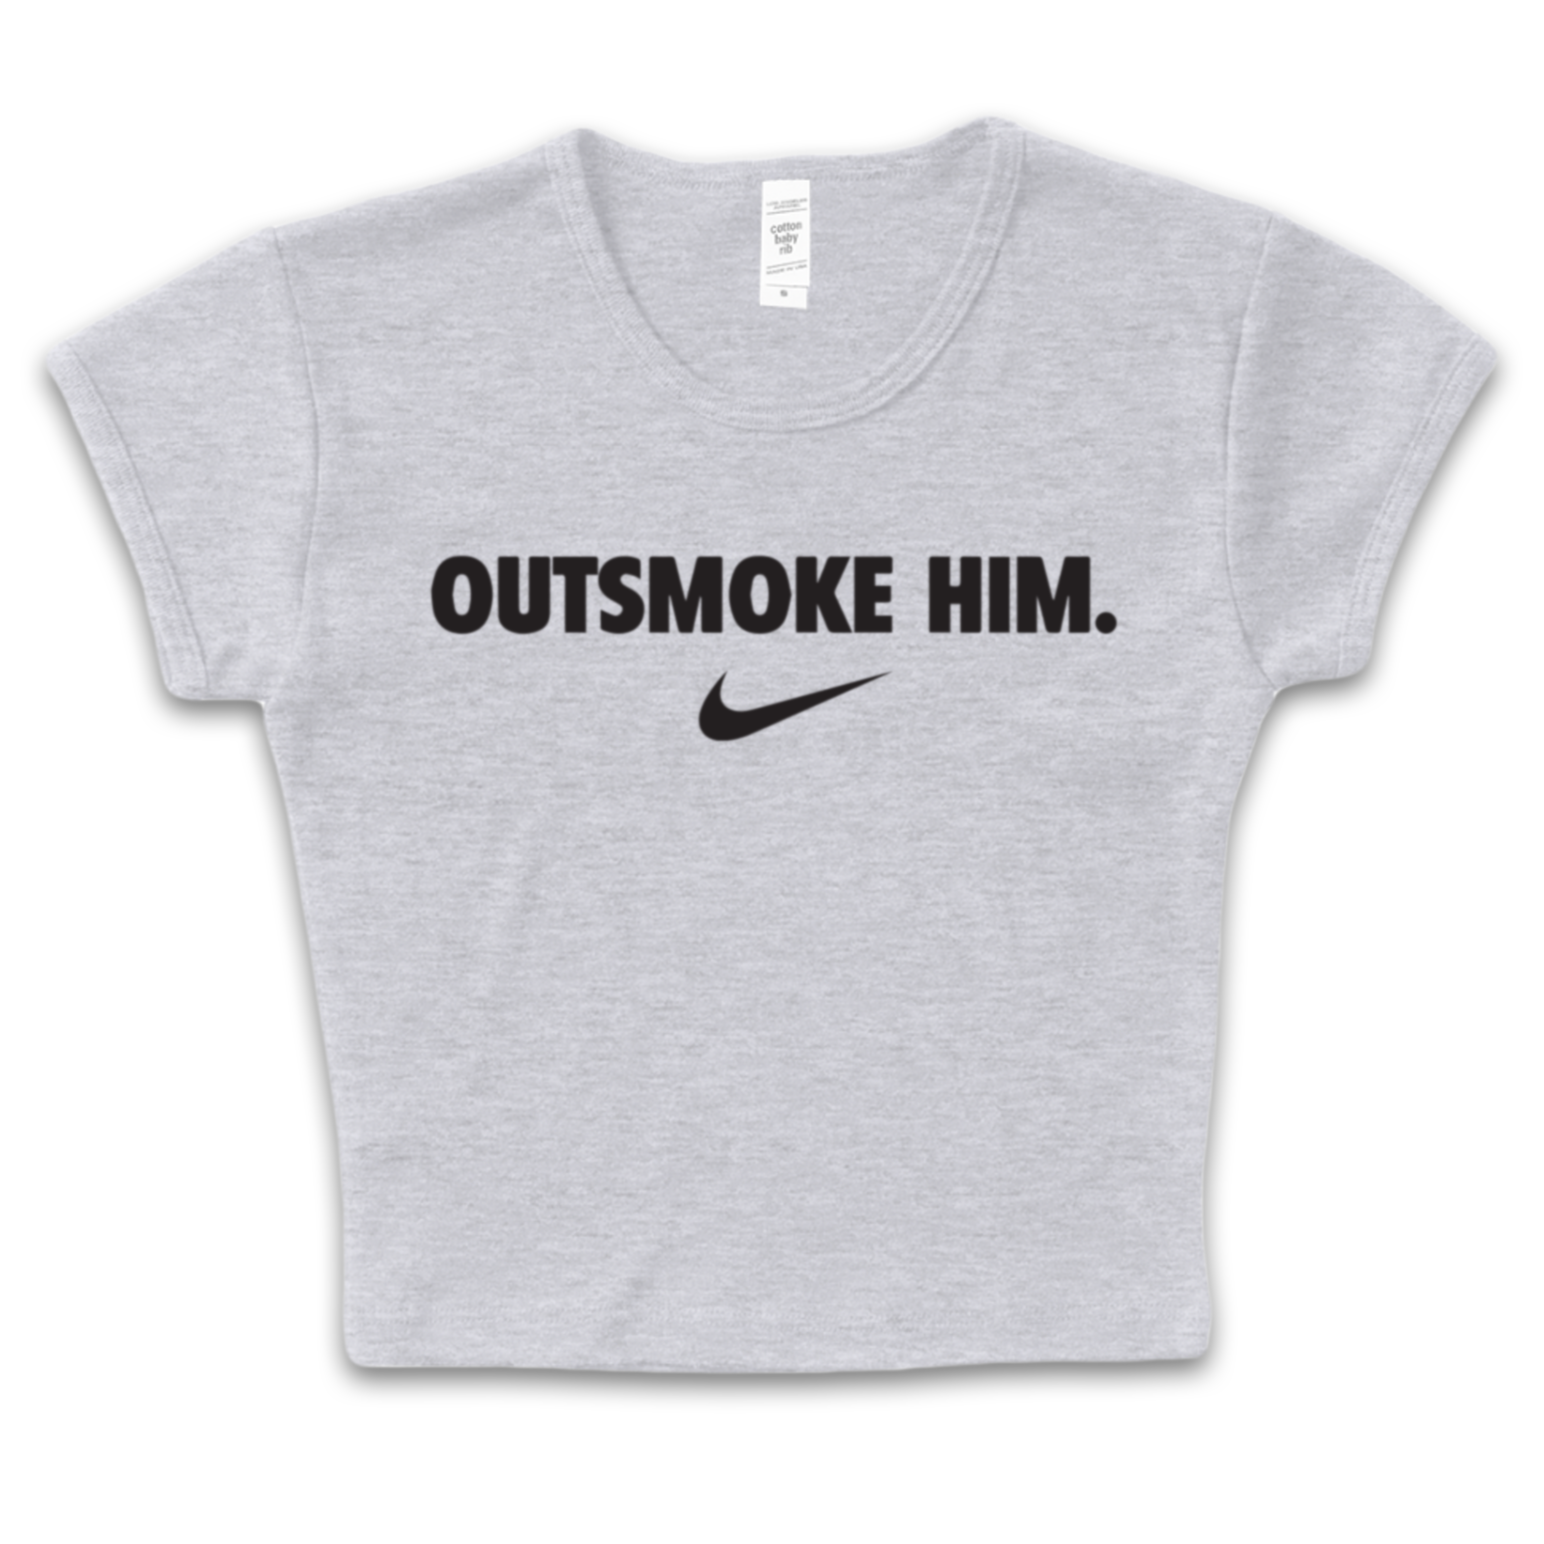 Outsmoke Him Baby Tee